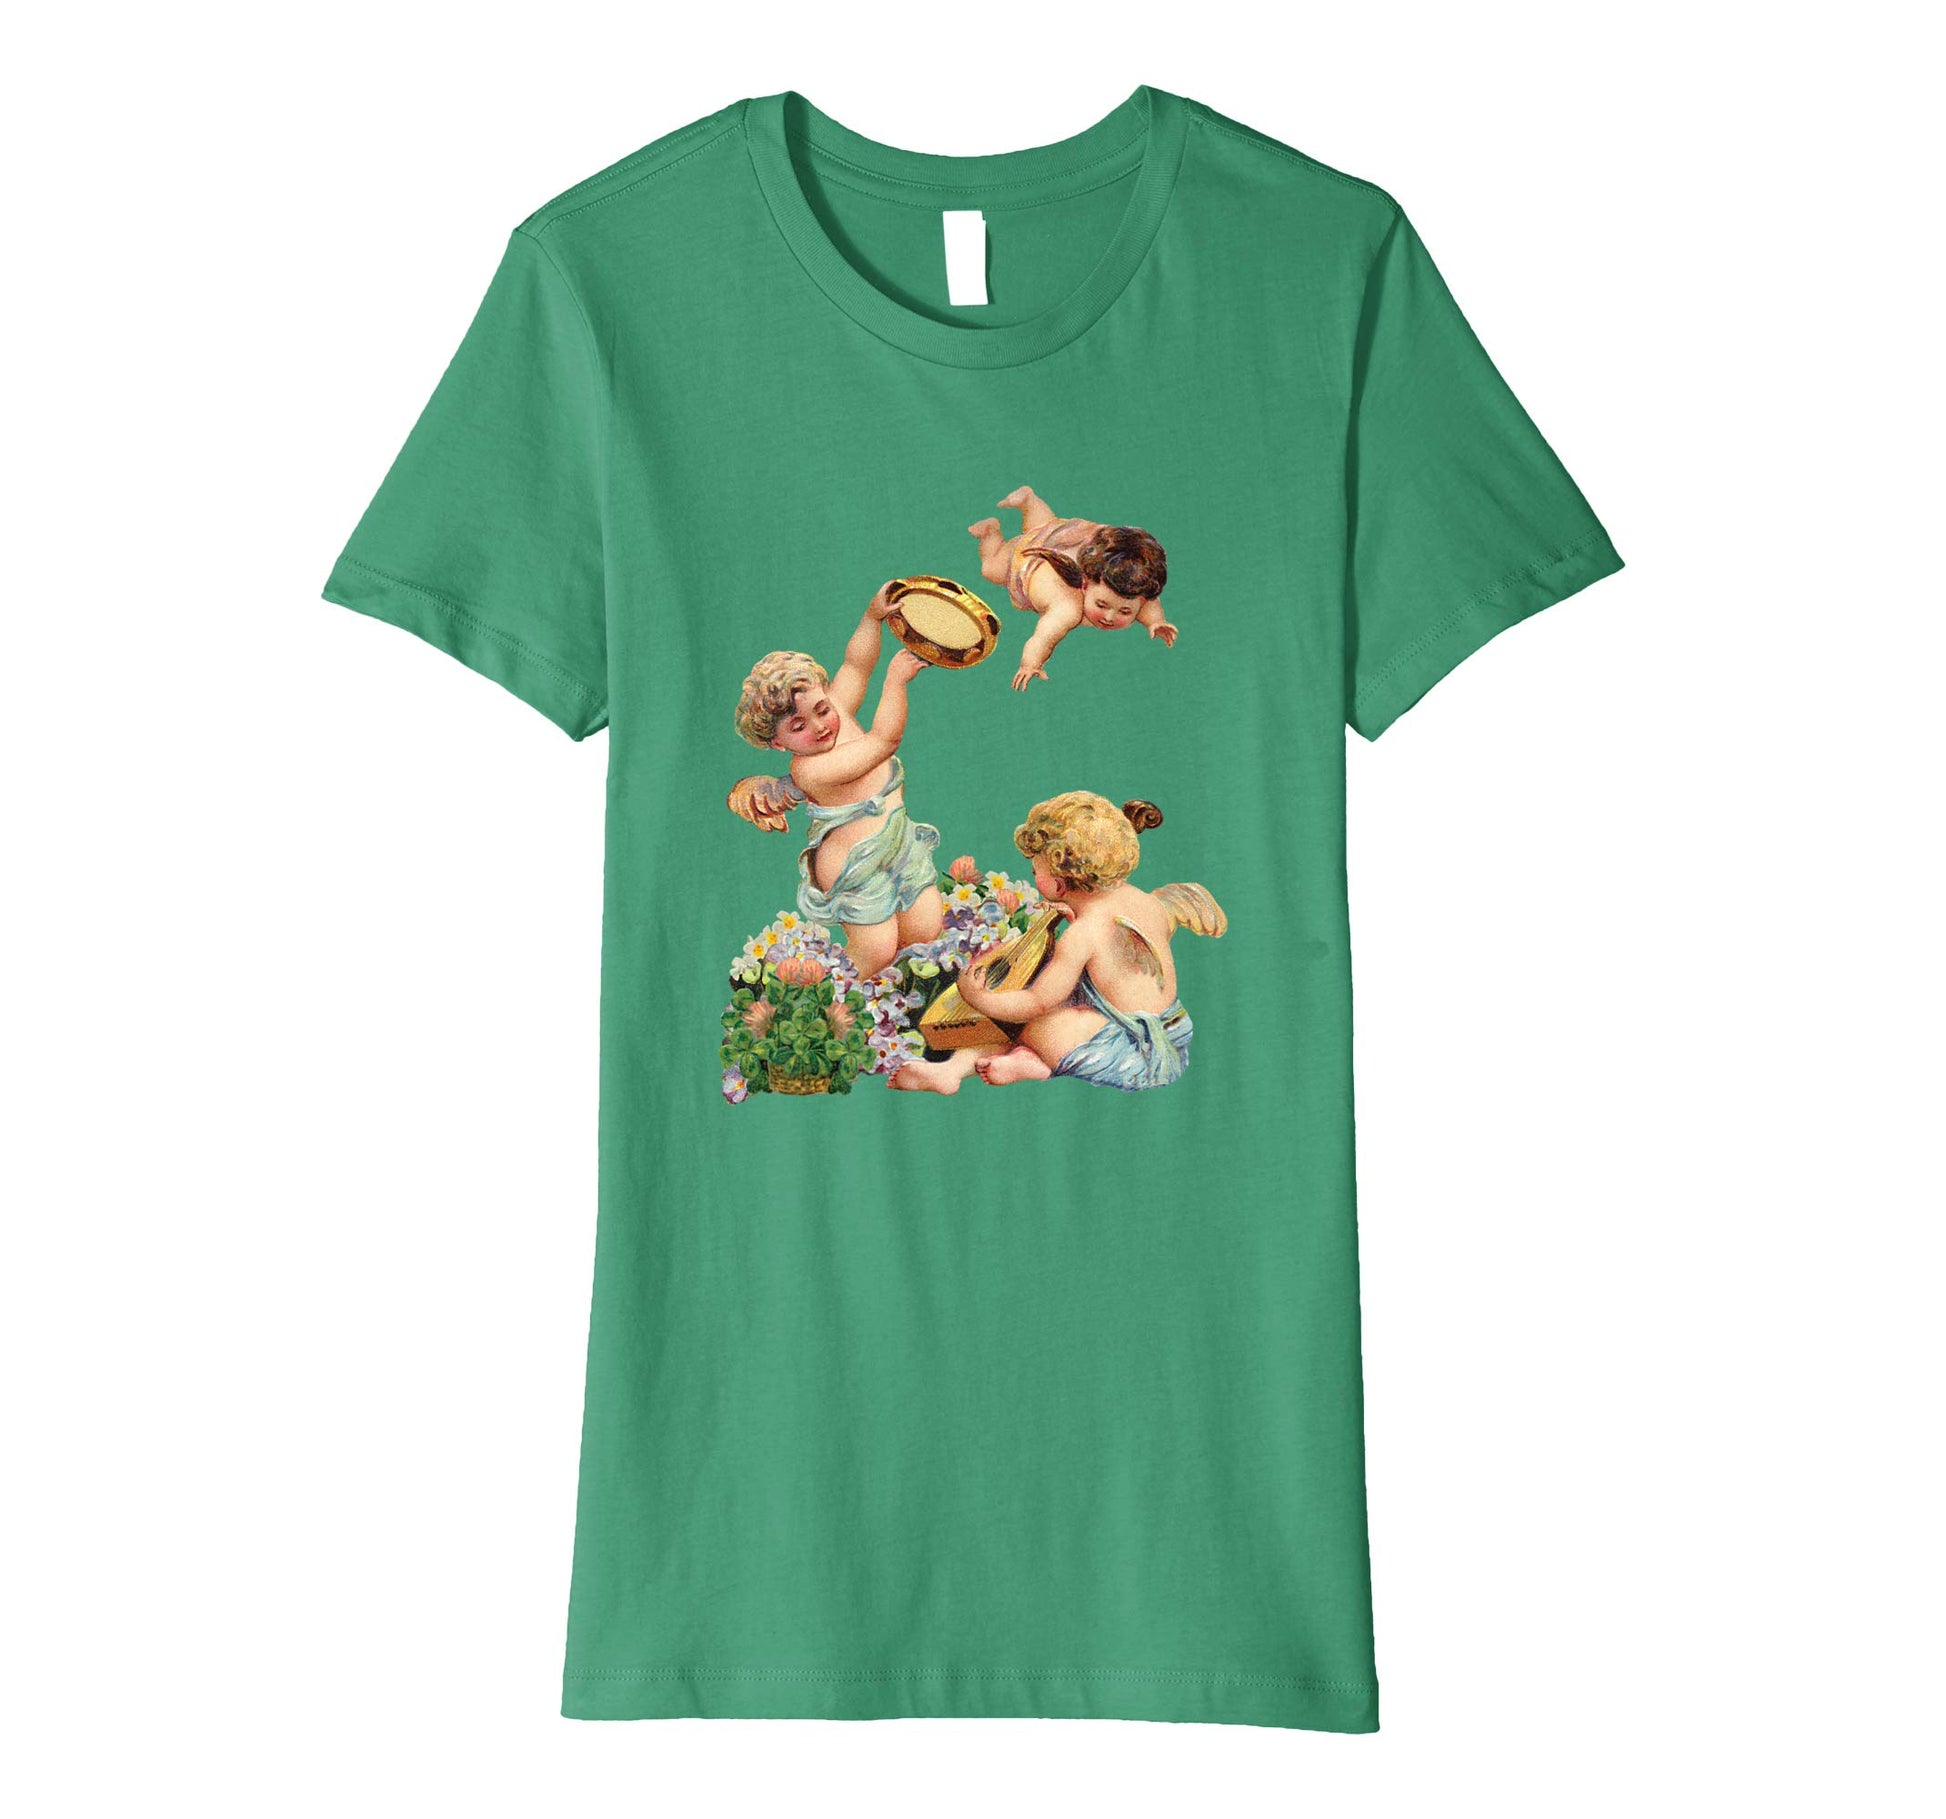 Womens Cotton Tee T-shirt Gift for Mom with Cherubs Playing Music Art Green